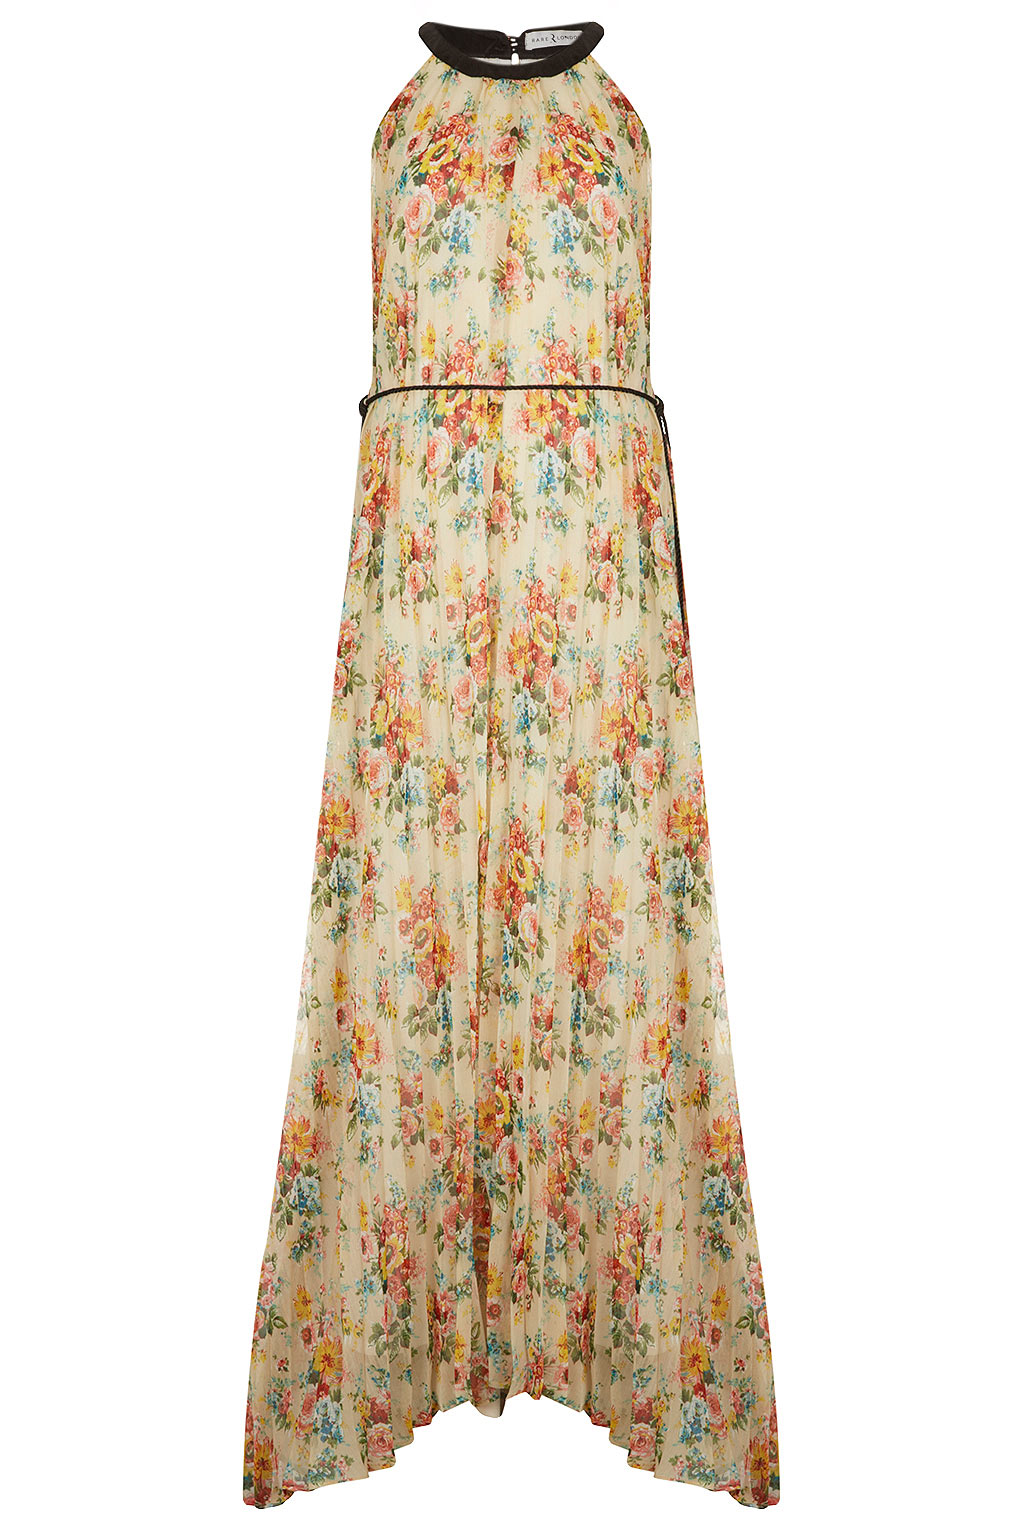 Topshop Floral Maxi Dress in Floral (cream) | Lyst